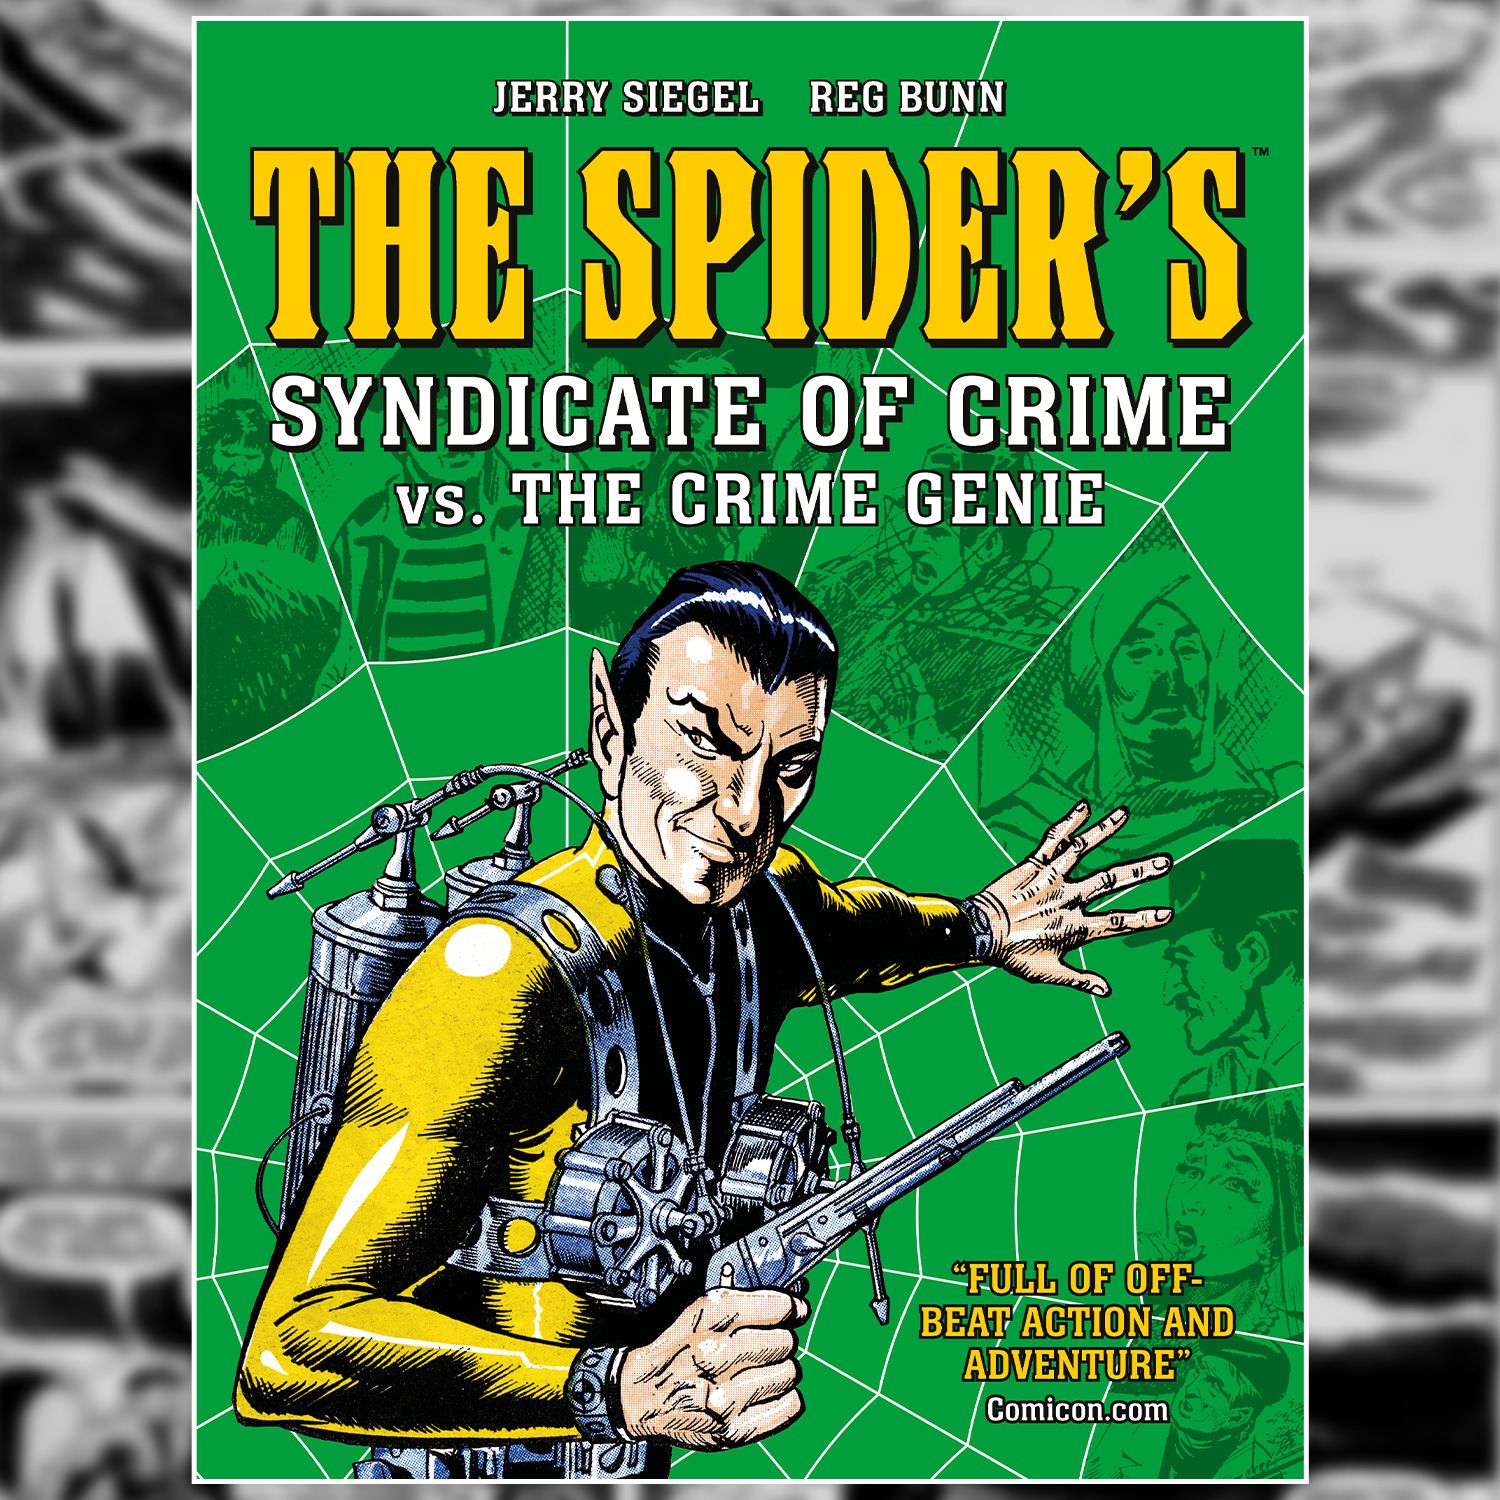 The King of Crooks returns! Pre-Order The Spider’s Syndicate of Crime vs. The Crime Genie now!